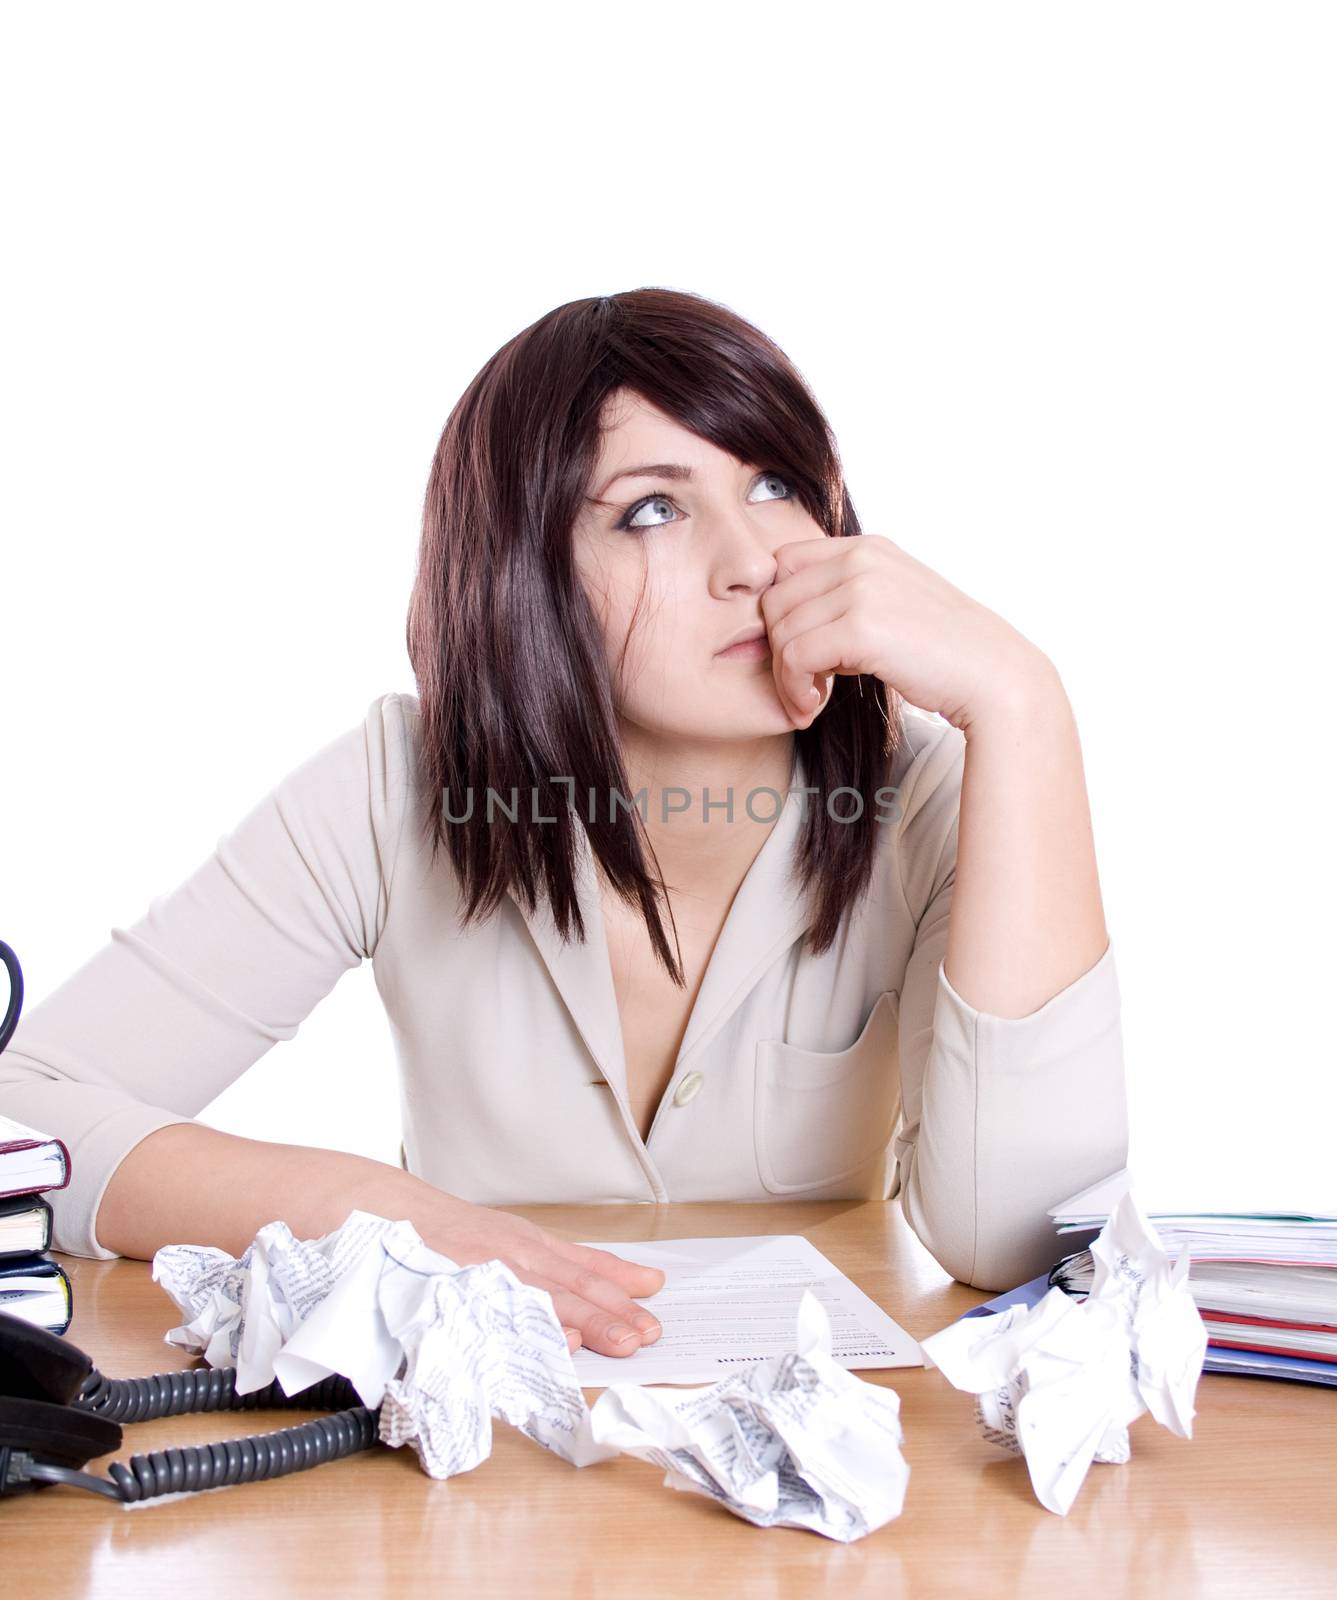 Stressed business woman with stack of paperwork, pile of crumpled papers isolated